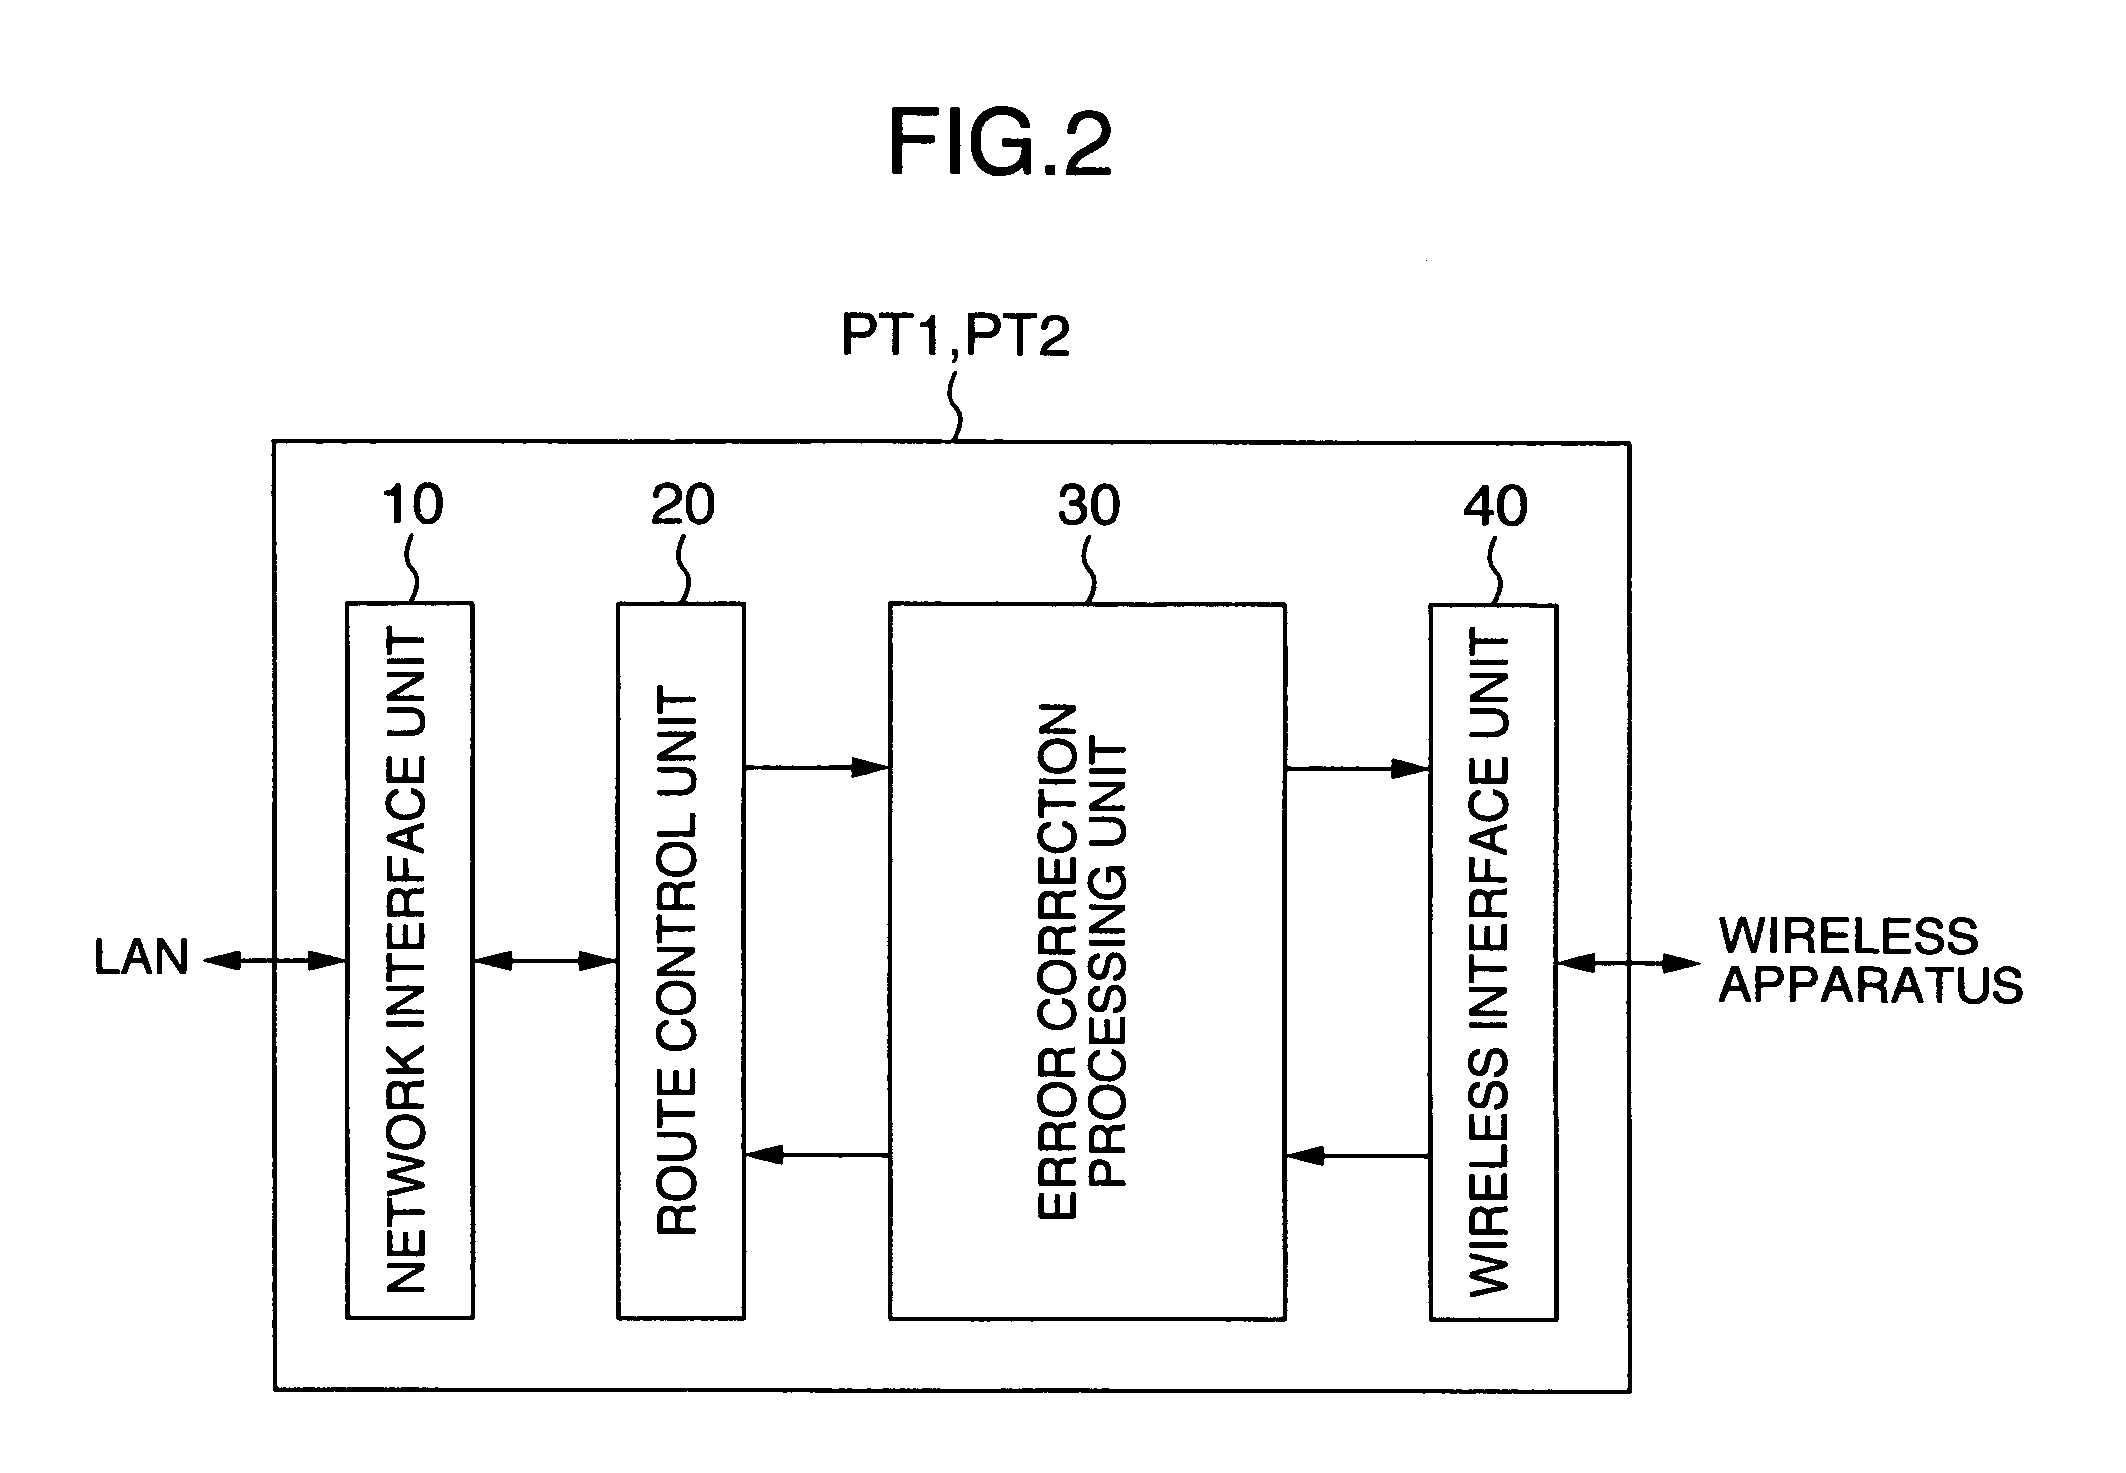 Wireless packet transfer apparatus and method